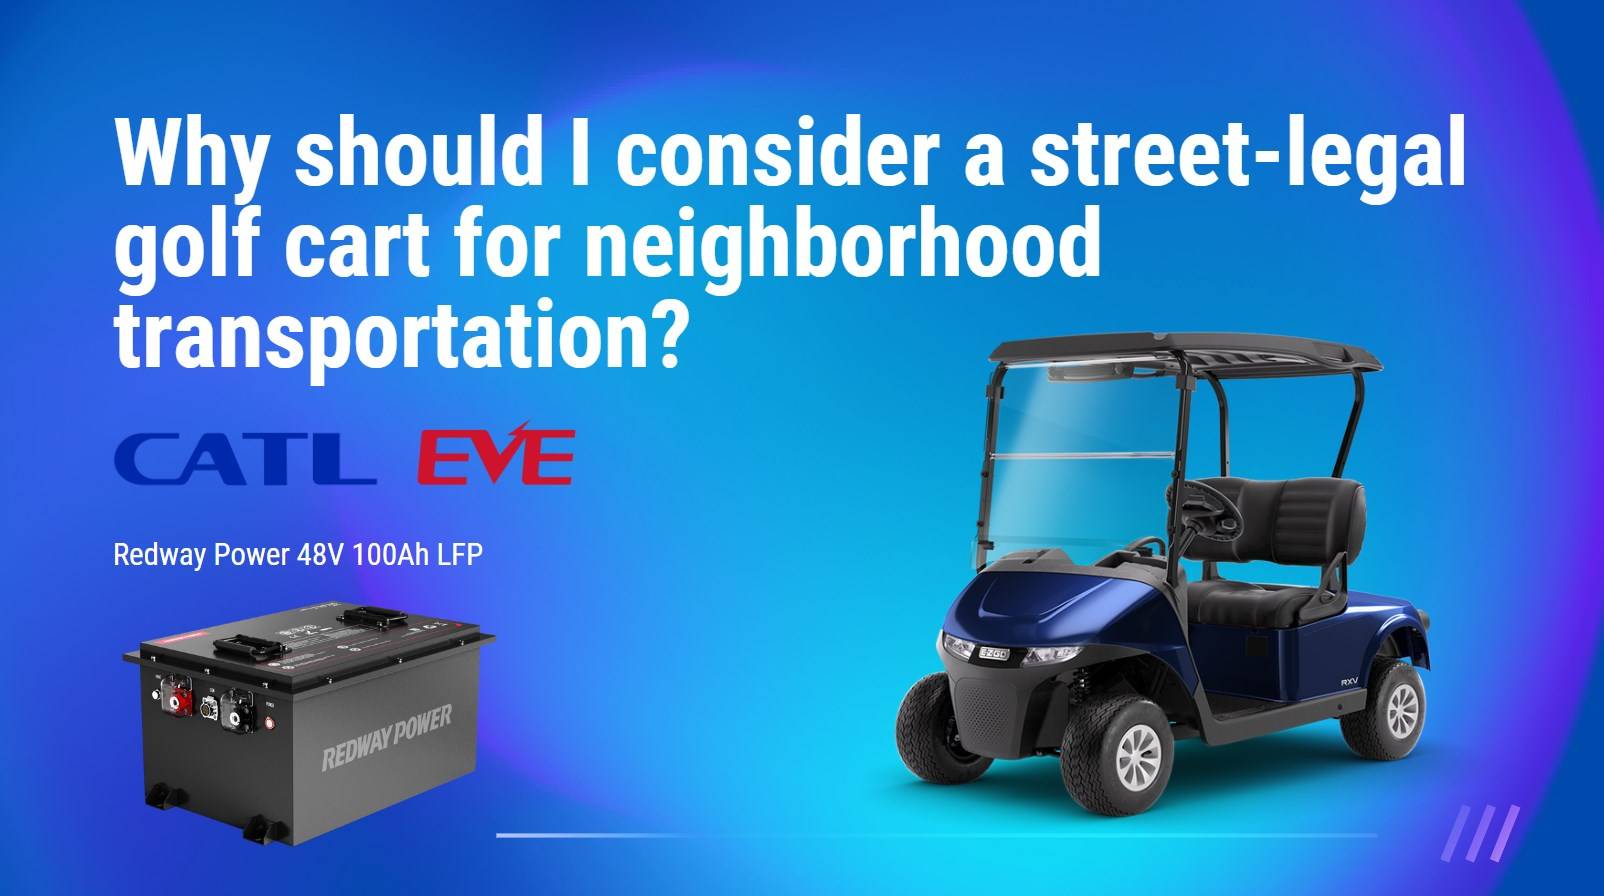 Why should I consider a street-legal golf cart for neighborhood transportation? Customize and Upgrade a Golf Cart. 48v 100ah lifepo4 battery golf cart redway power